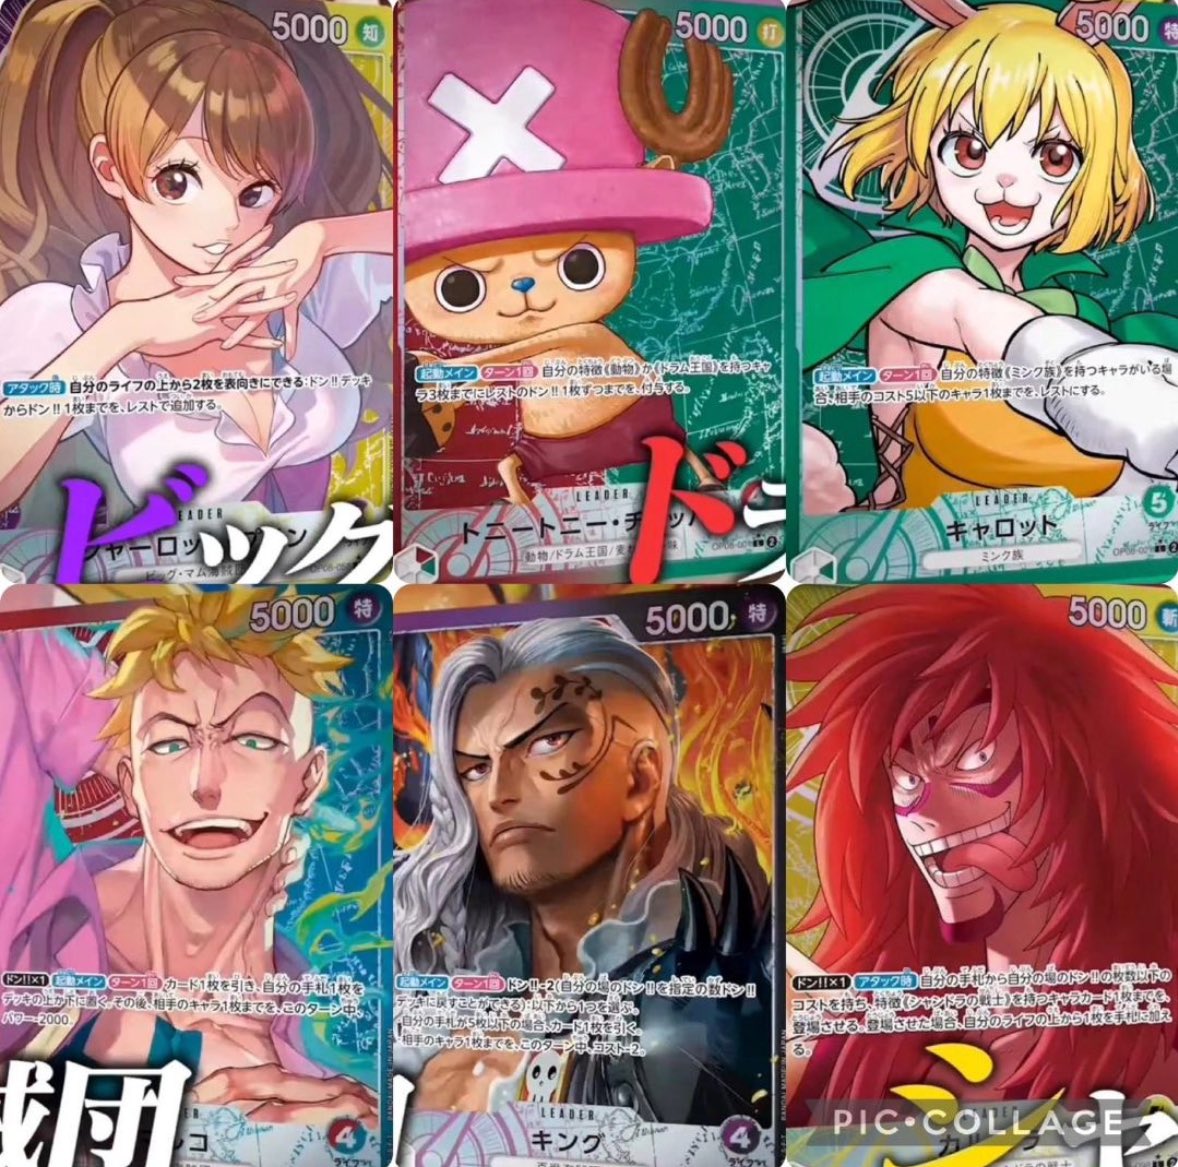 All our 6 alternate art leaders revealed! Honestly pretty awesome looking set for sure 🔥

Thank you @Krish_bringiton for the collage sorry I stole it off your IG story 😂